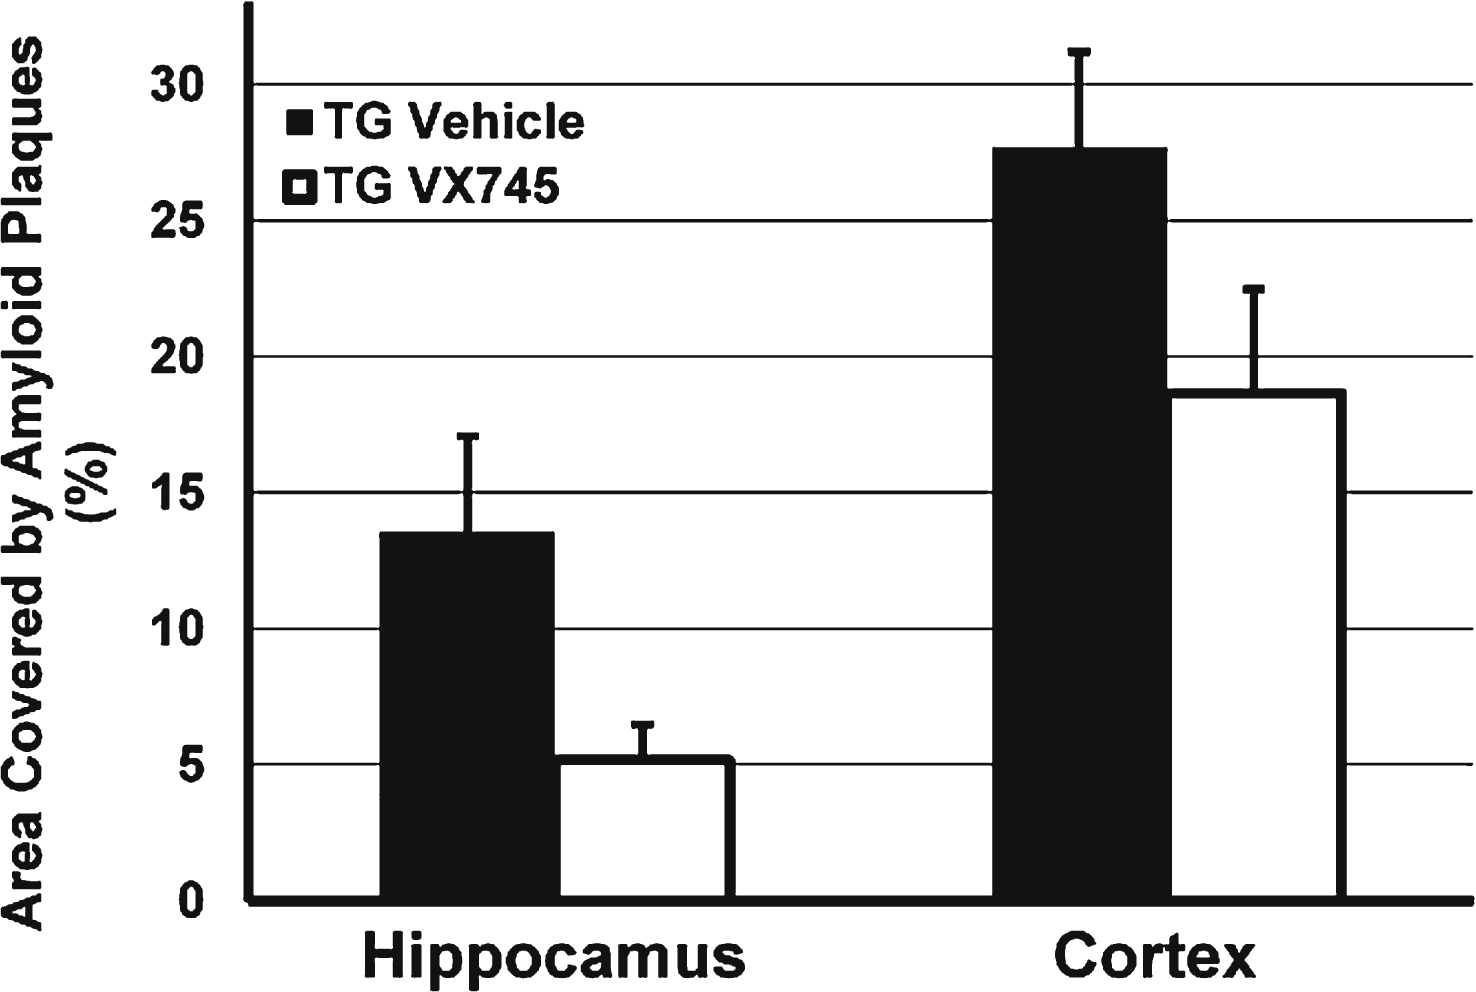 Effects of VX-745 on the area of amyloid plaque in the hippocampus and cortex of Tg2576 mice. Expressed as Mean (±SEM) percentage of total area by immunohistochemistry staining for Aβ. Mice treated with VX-745 (3 mg/kg) demonstrated a statistical trend toward decreased number of amyloid plaques in the hippocampus (p = 0.069, unpaired two-sided t-test), compared to vehicle treated transgenic mice. In addition, amyloid plaque load was numerically lower in the cortex of VX-745-treated lower (p = not significant).